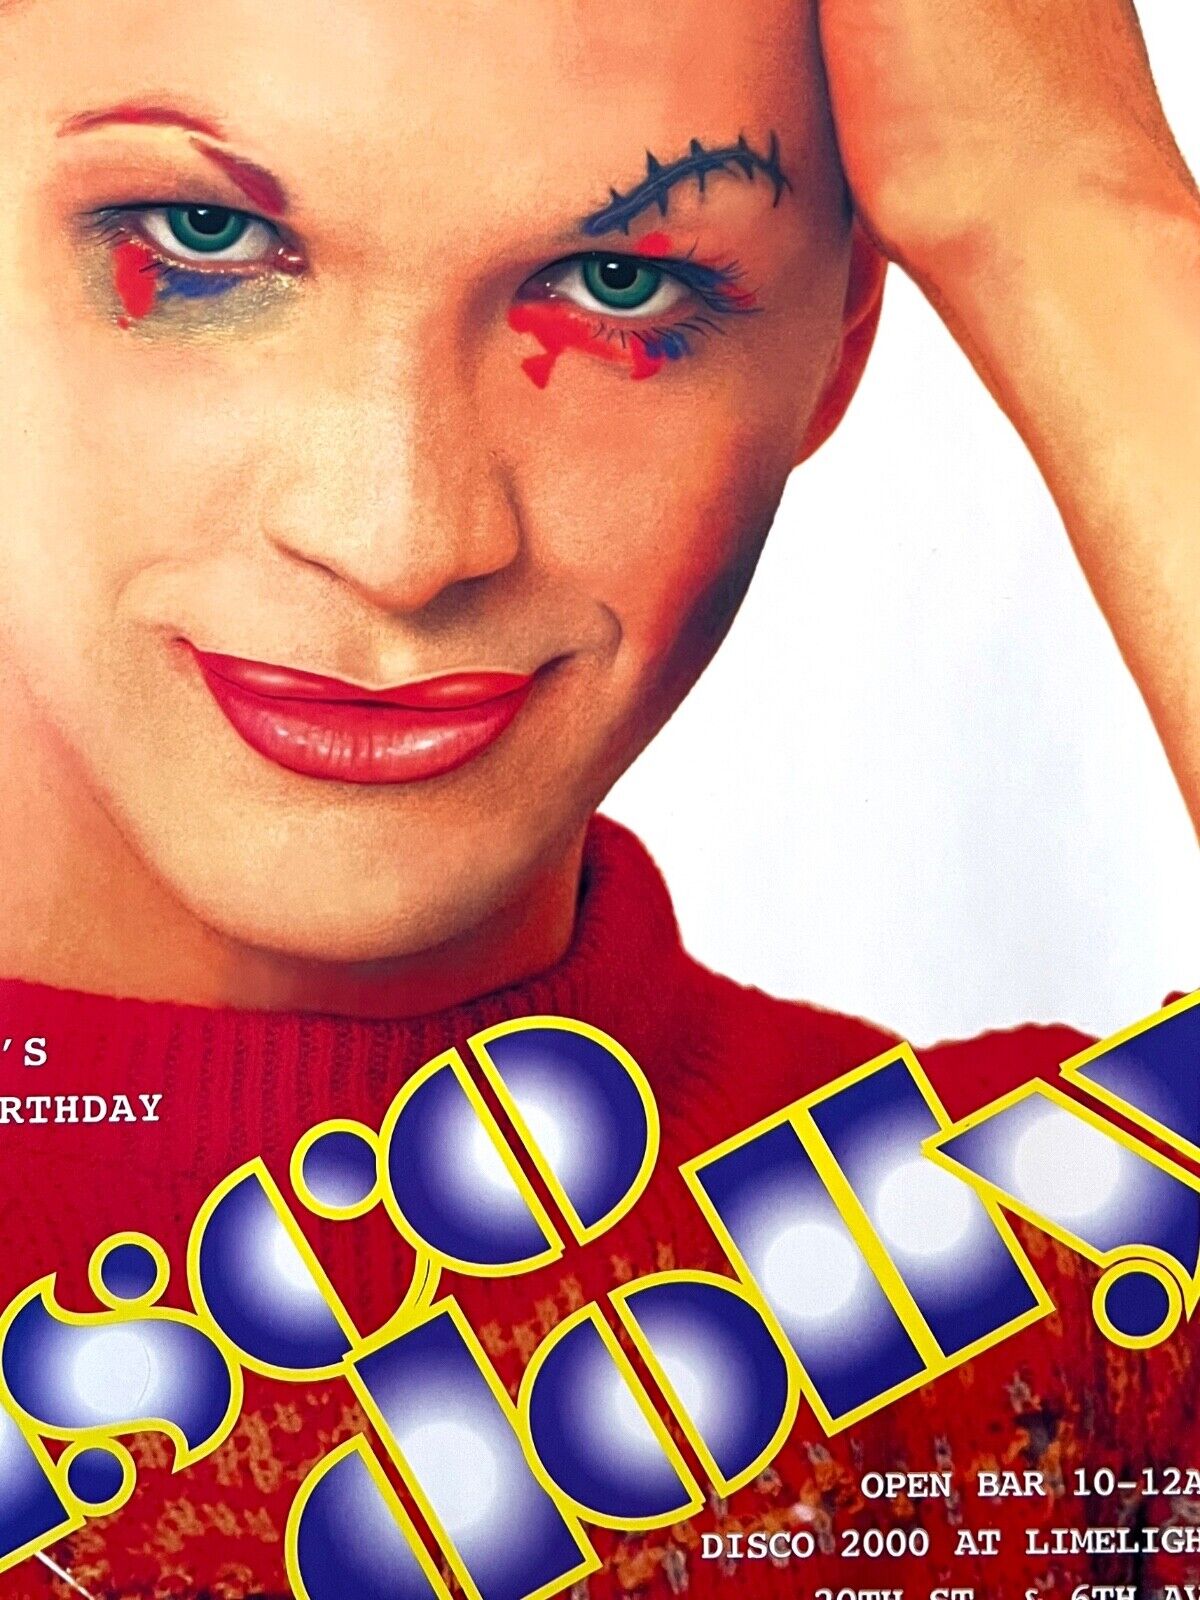 Michael Alig Disco Dolly - Vintage Birthday Poster from 1994 at Disco 2000